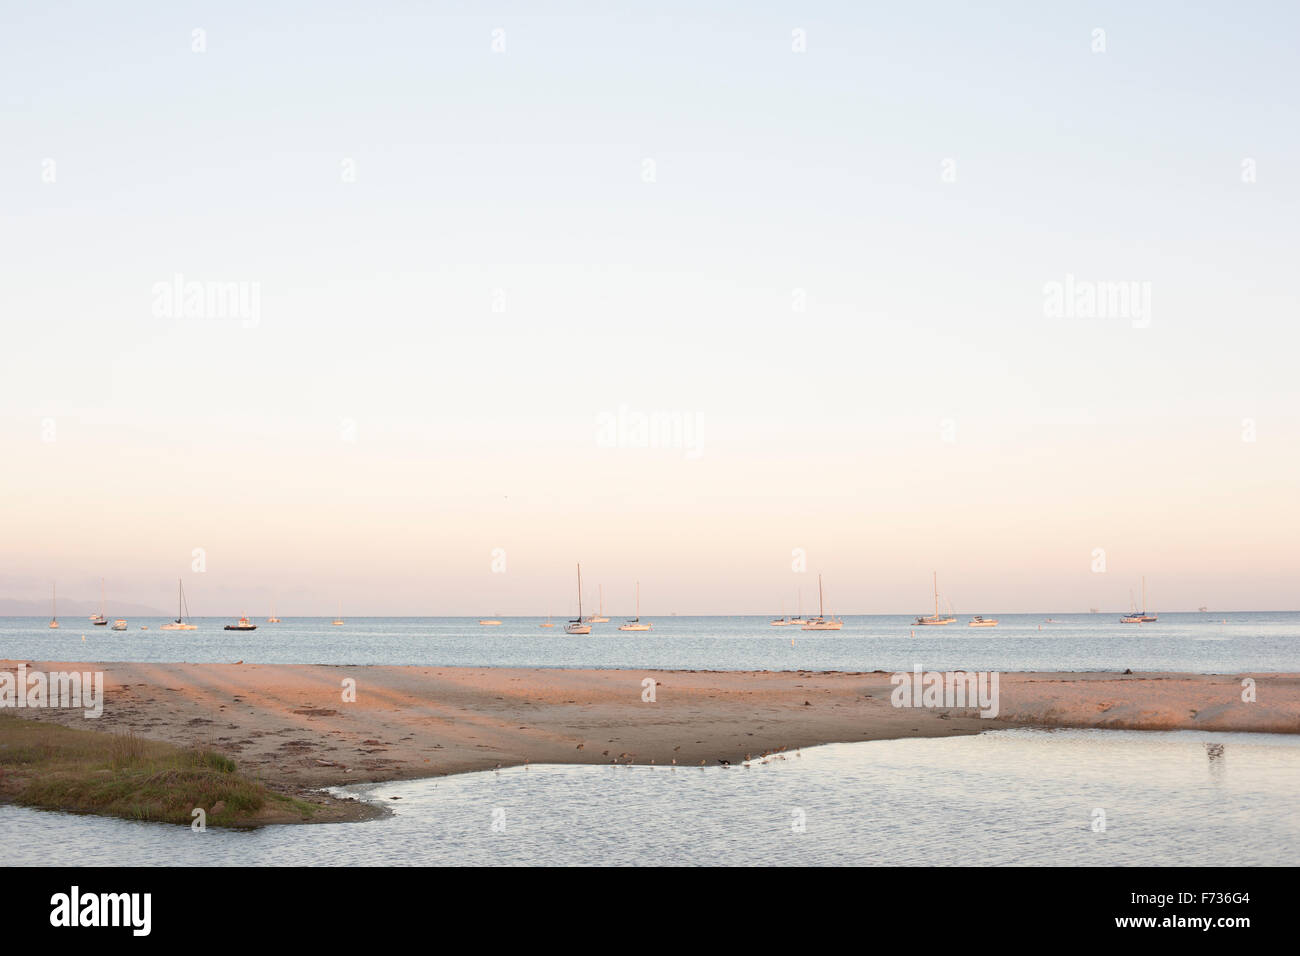 Sandy beach and ocean, sailing boats in the distance. Stock Photo